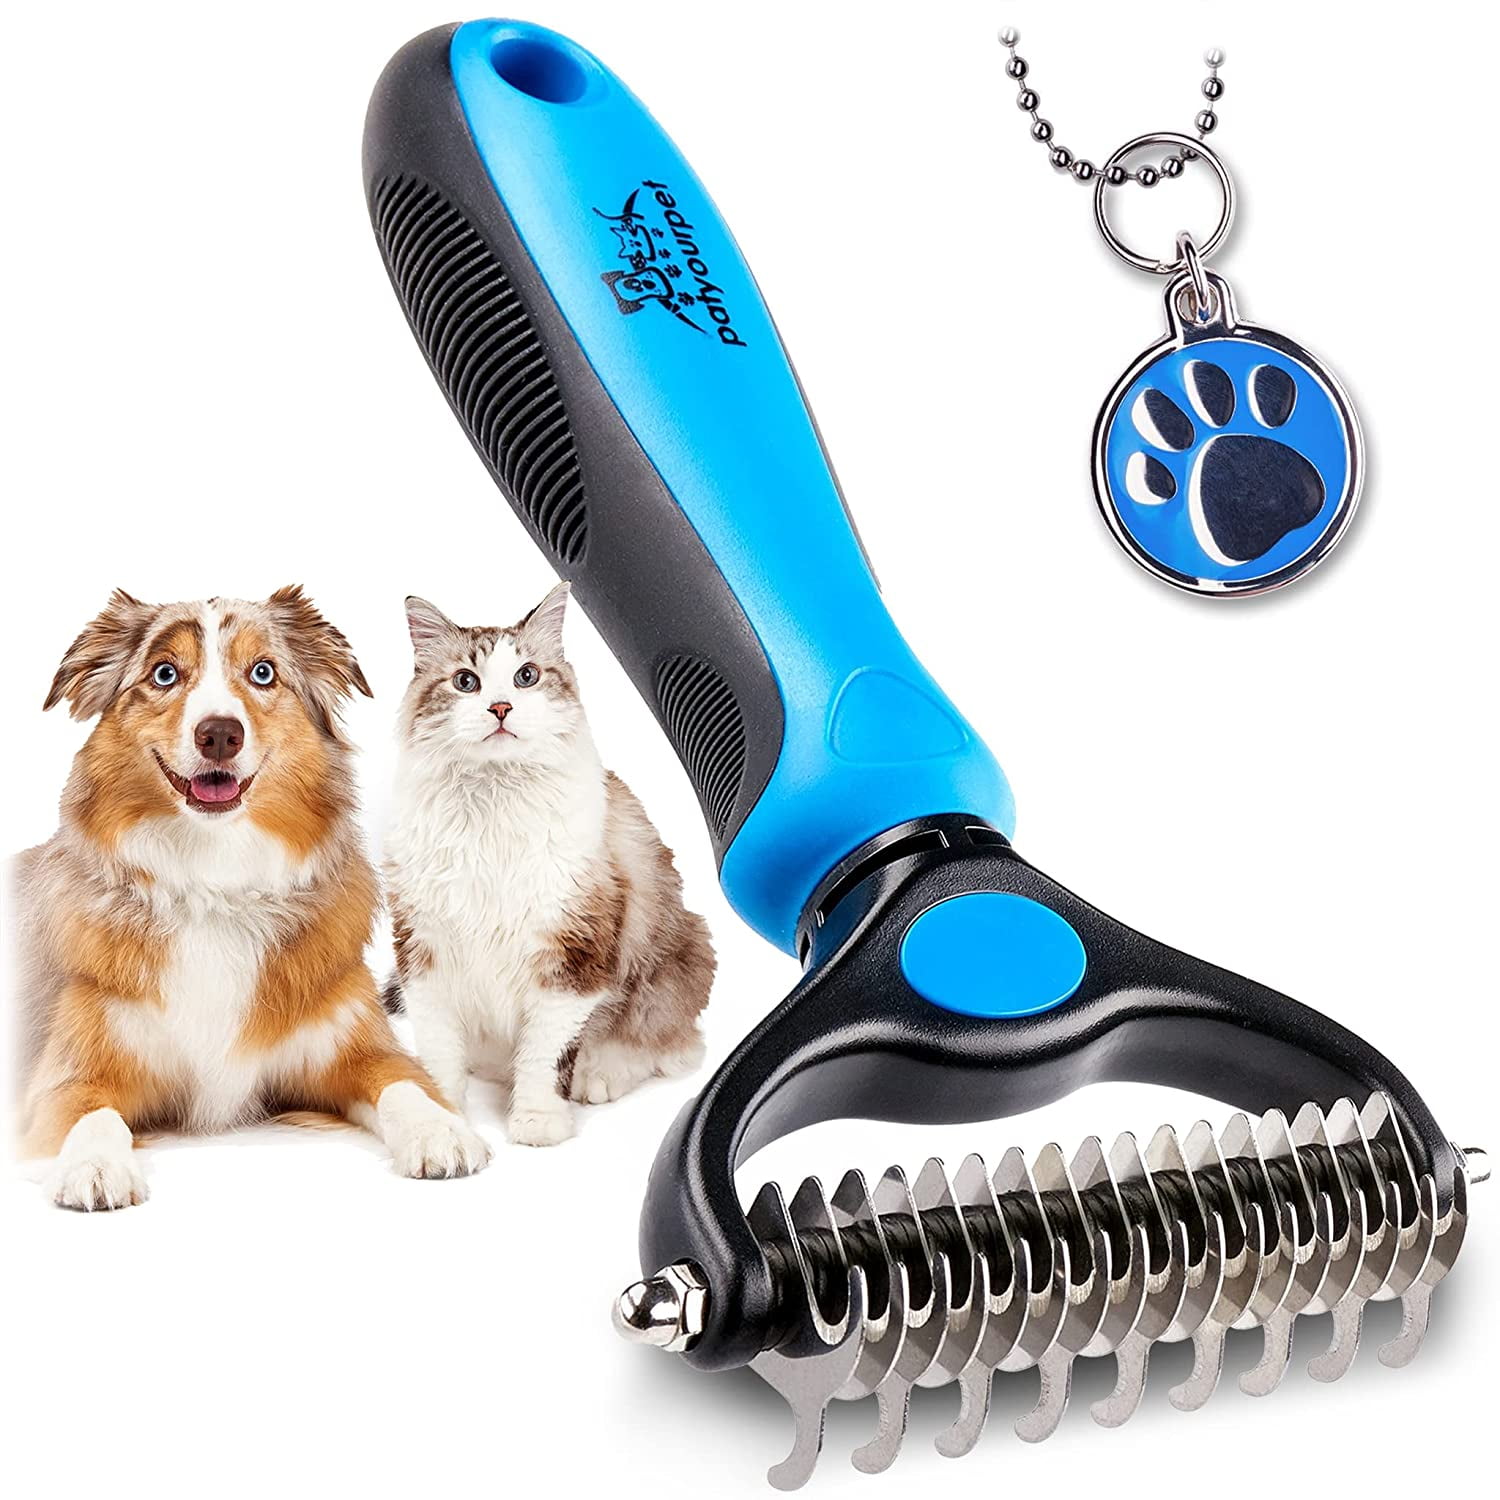 Pat Your Pet Deshedding Brush - Double-Sided Undercoat Rake for Dogs ...